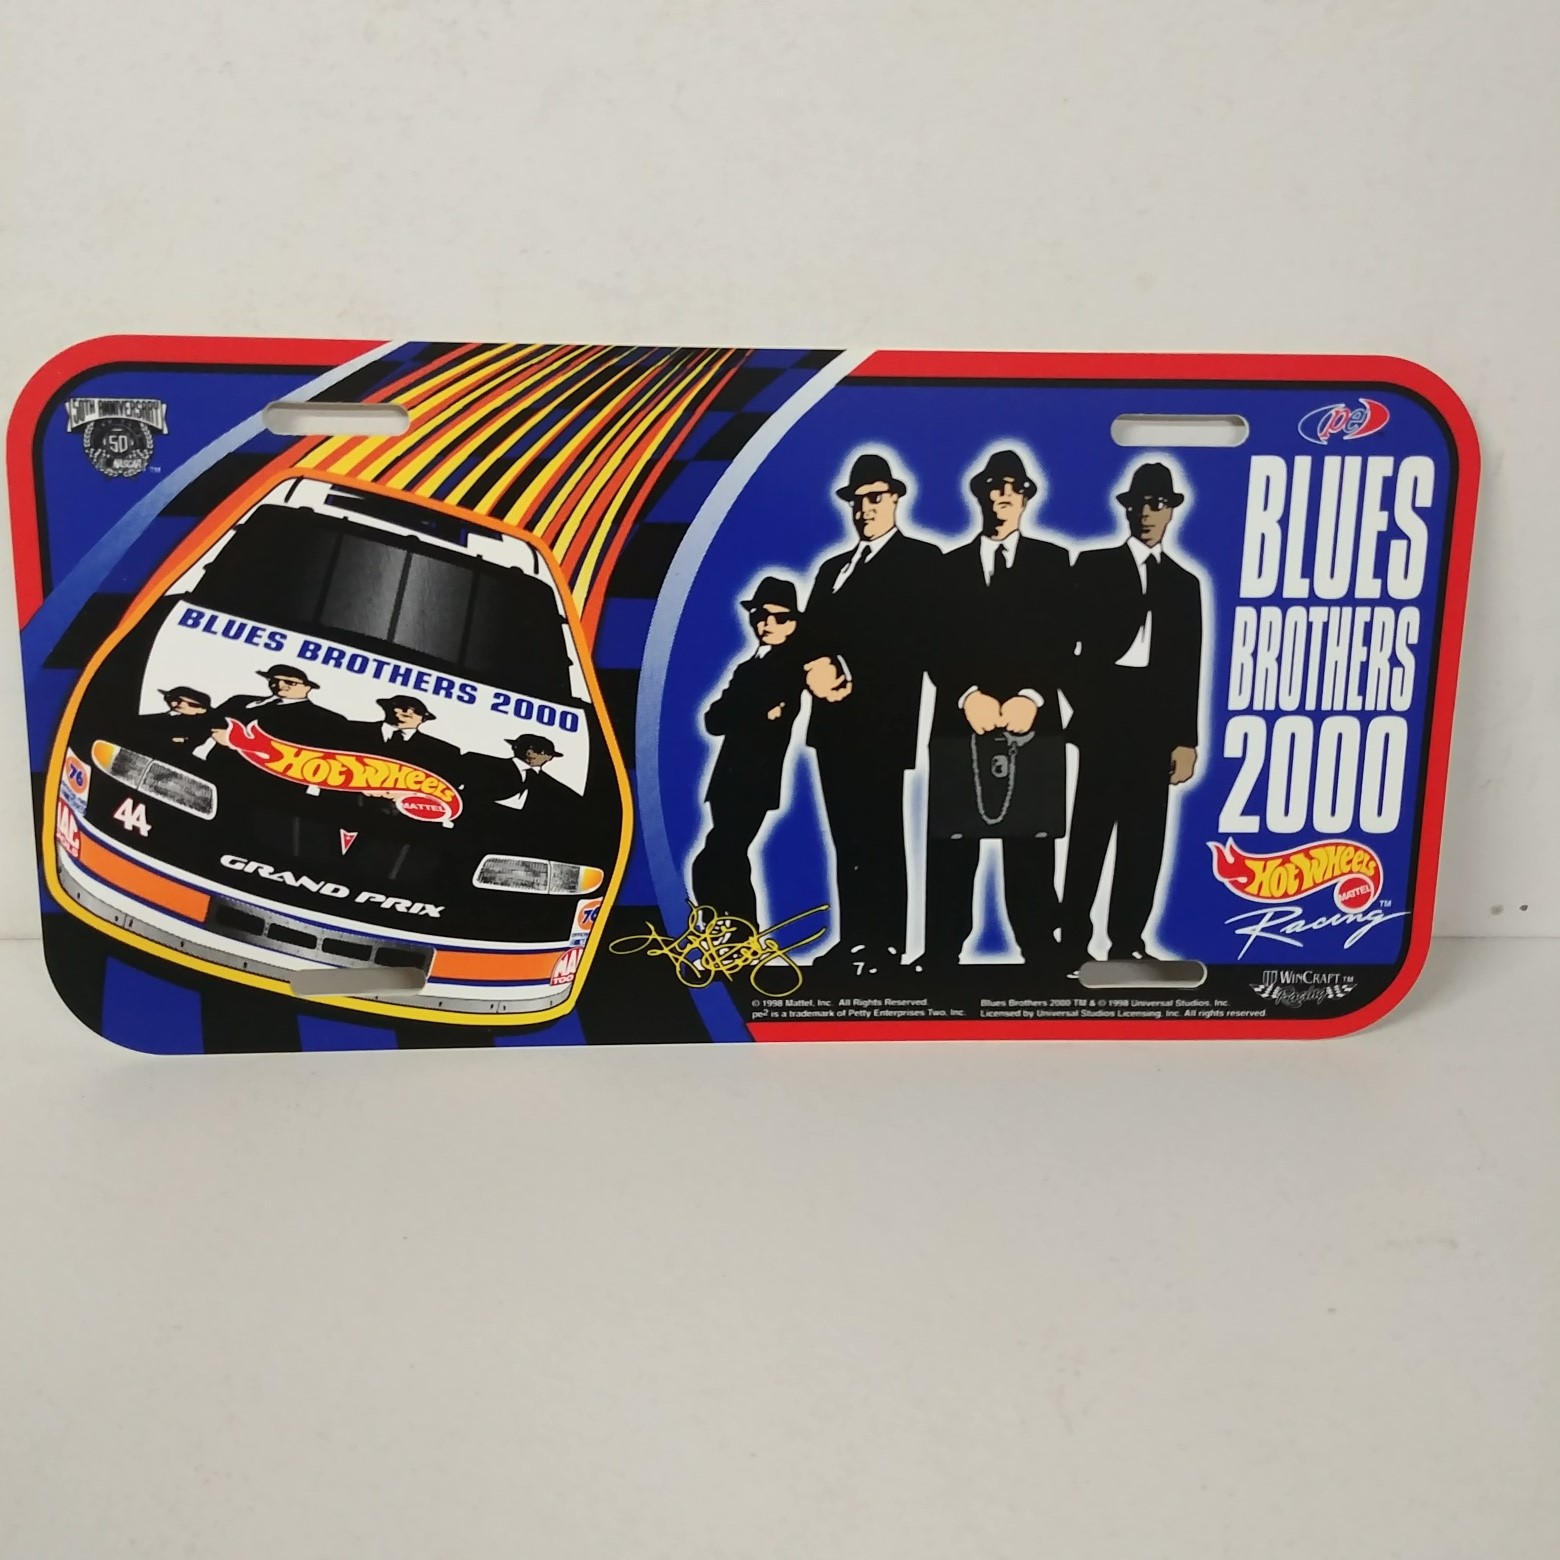 1998 Kyle Petty Blues Brothers 2000 plastic license plate